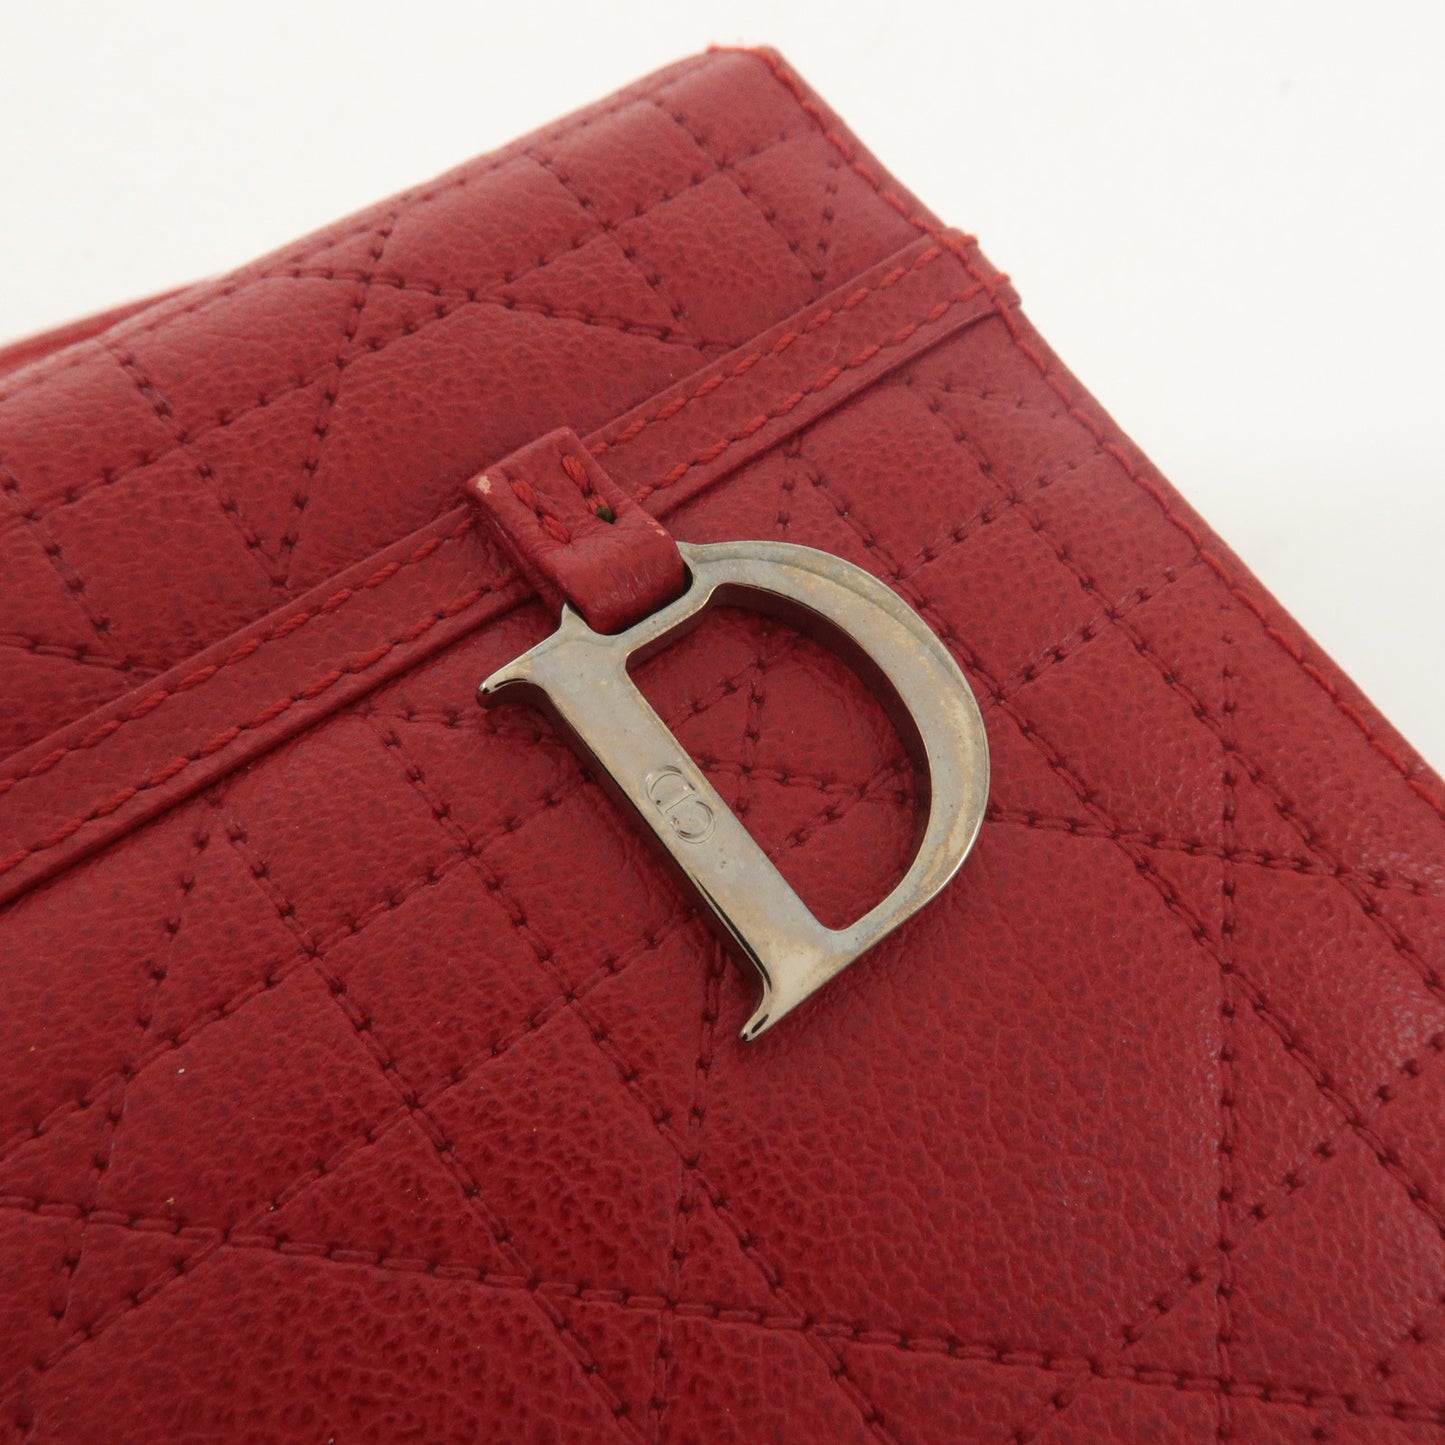 Christian Dior Leather Cannage Vanity Bag Hand Bag Red